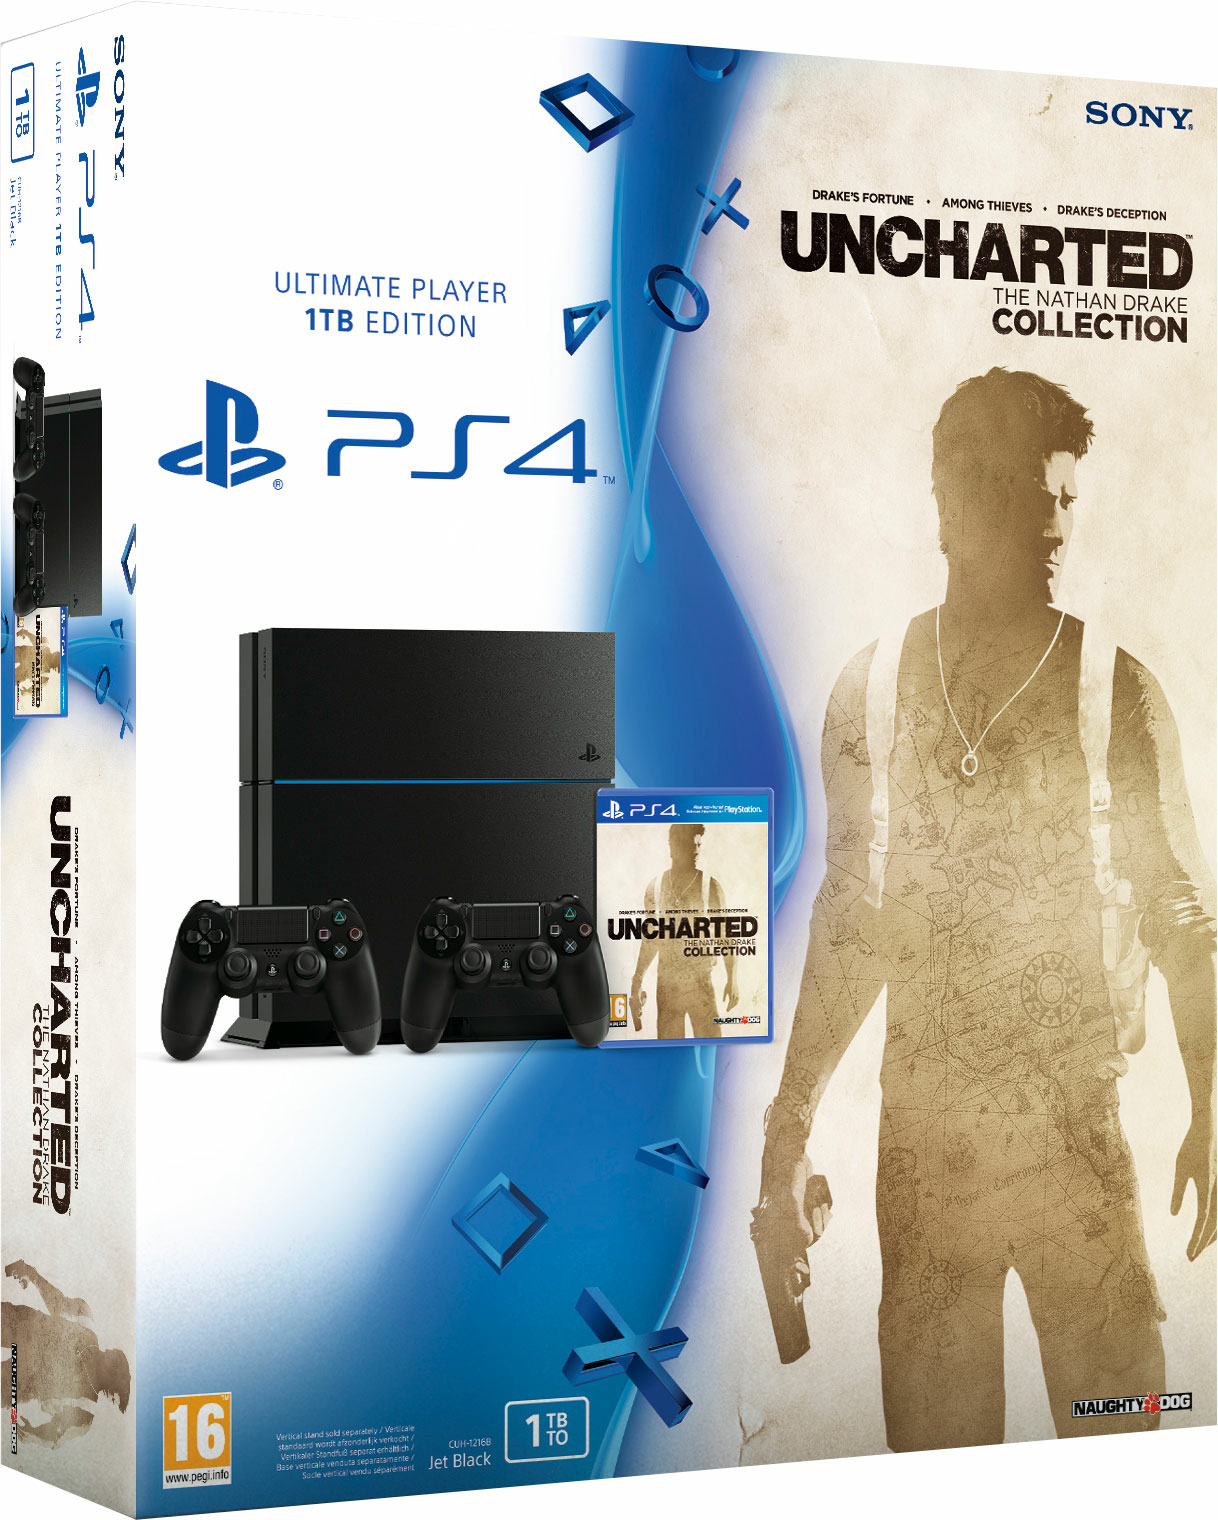 Uncharted collection купить. Uncharted коллекция ps4. Uncharted 1 ps4. Uncharted Nathan Drake collection ps4.